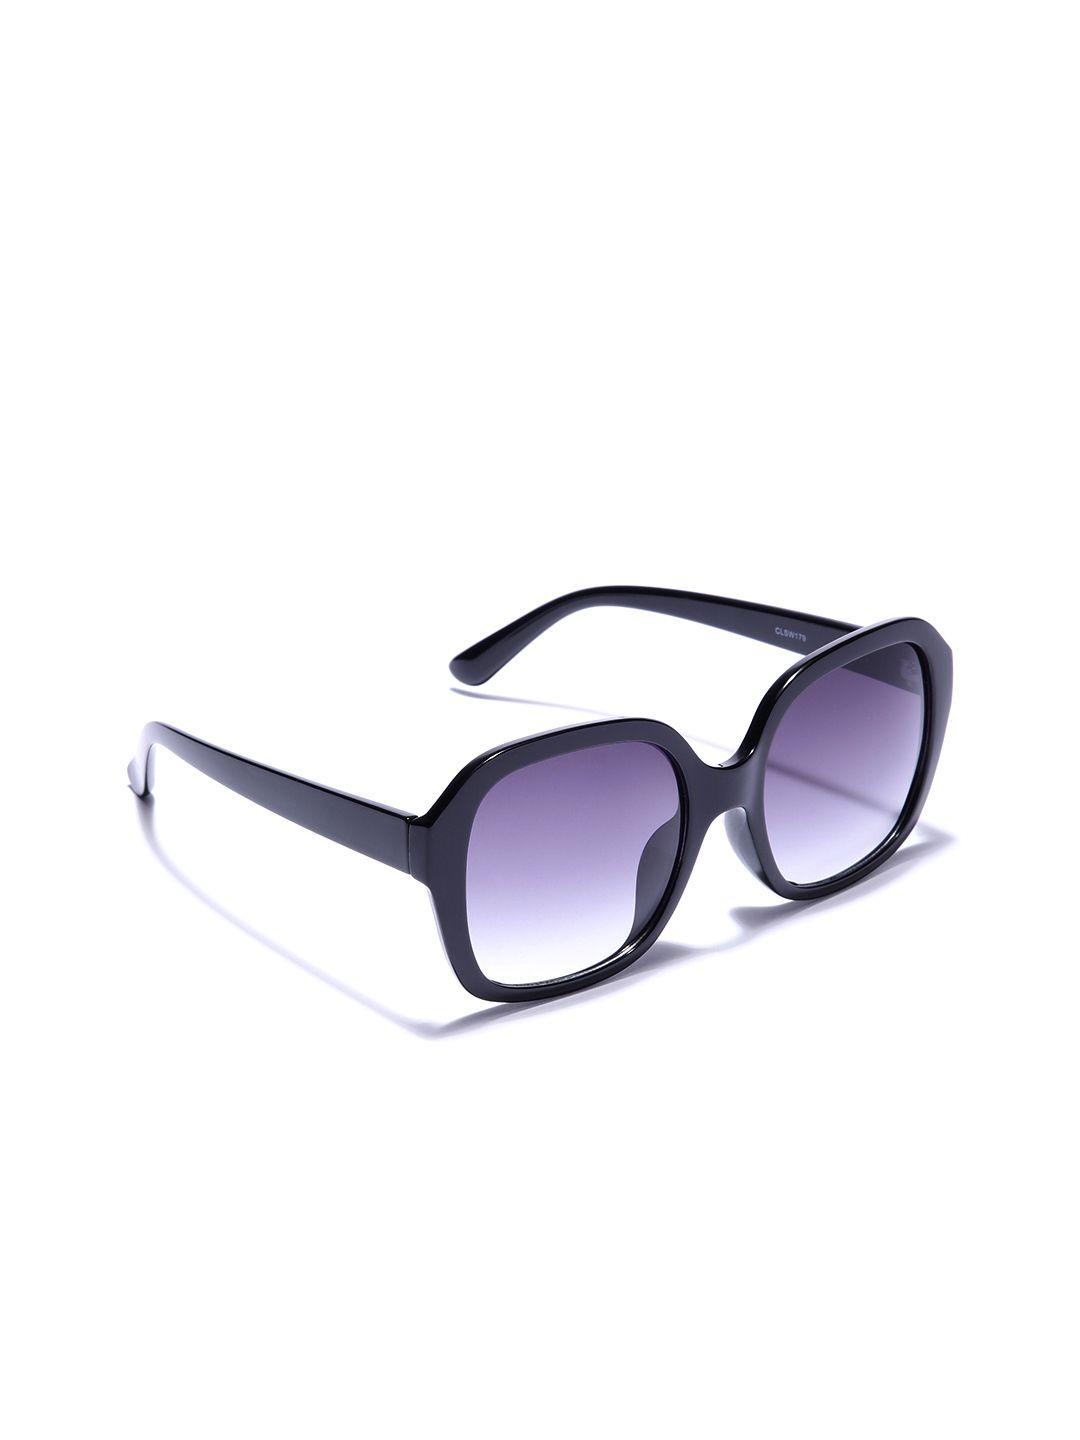 carlton-london-women-oversized-sunglasses-with-uv-protected-lens---clsw179